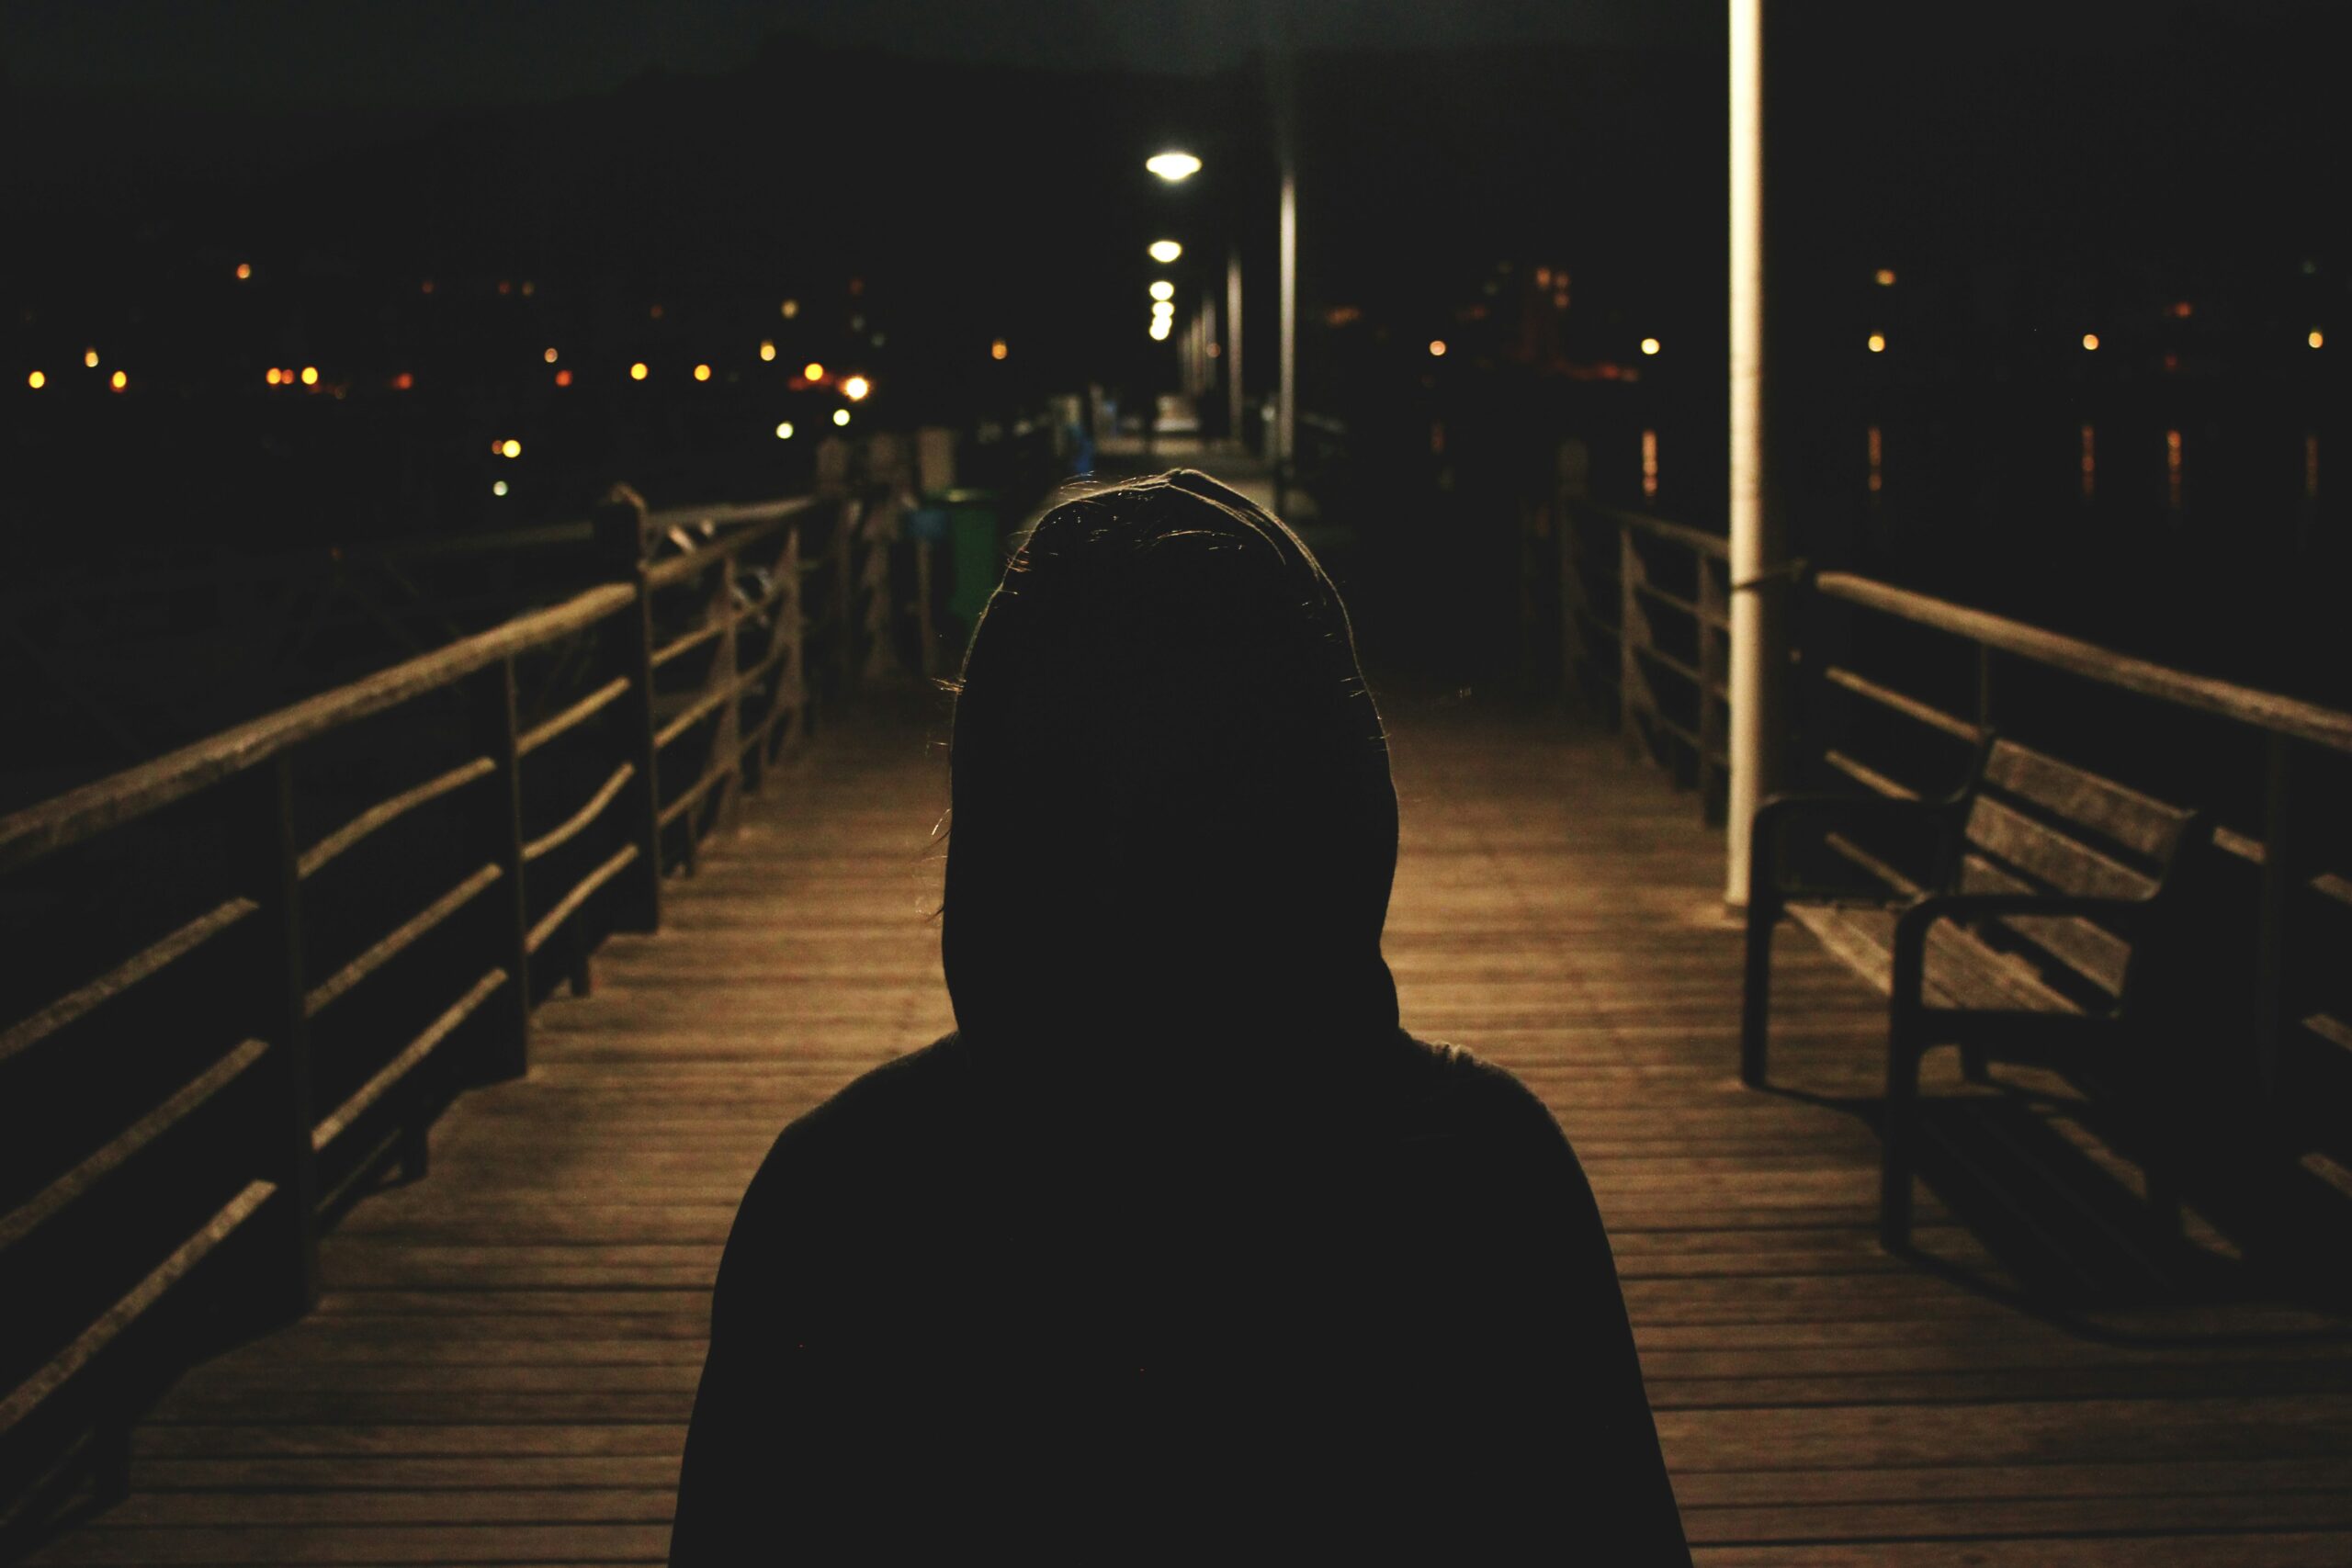 An image of the back of a person walking down a boardwalk in dark clothes at night time representing the state of fear that can lead to irrational thinking without proper help and therapy for men in California.